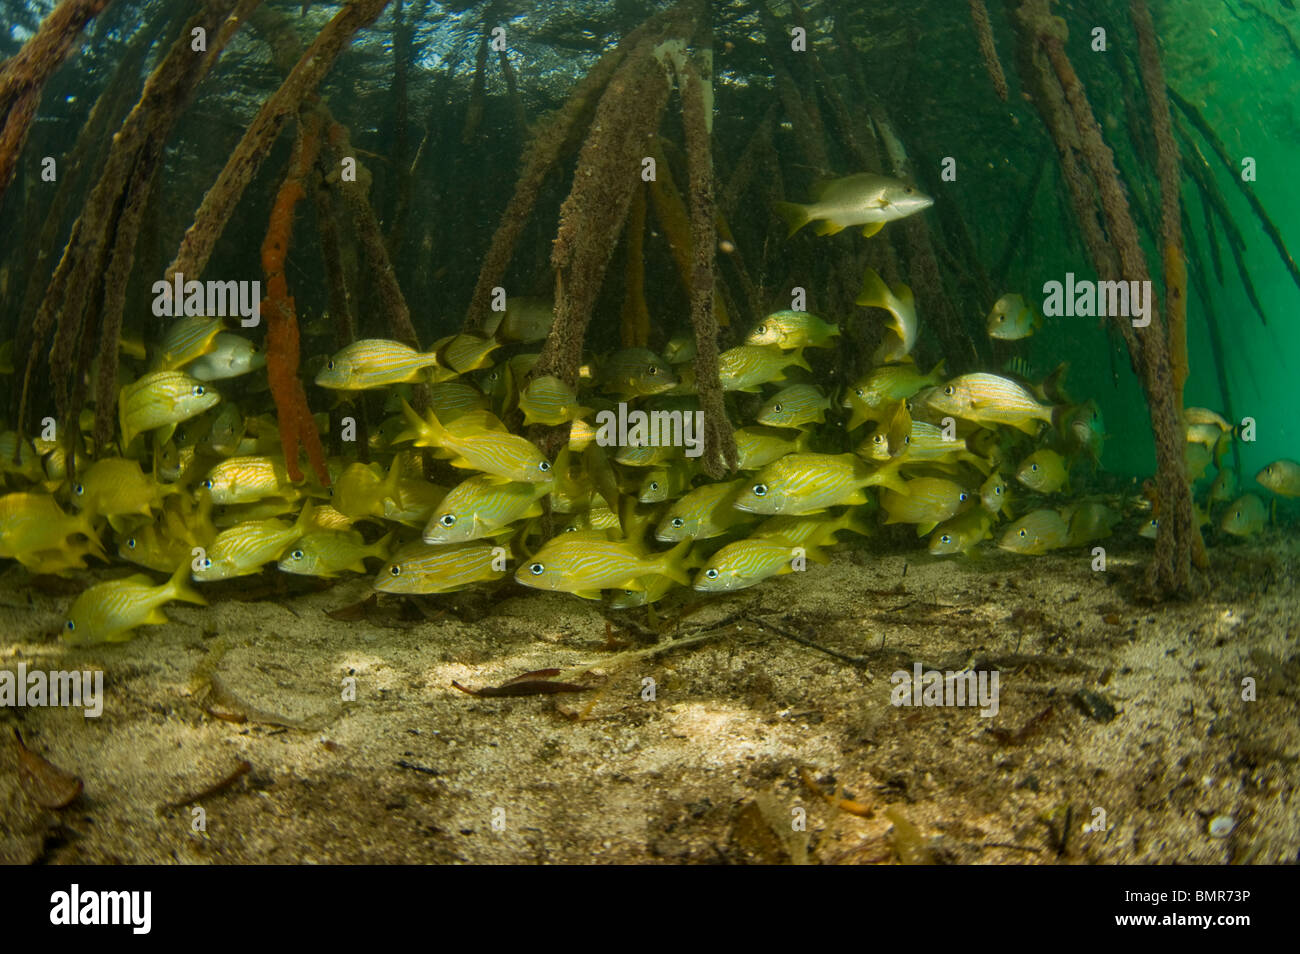 French Grunts (Haemulon flavolineatum) sheltering among the roots of red mangroves ((Rhizophora mangle) in Belize. Stock Photo